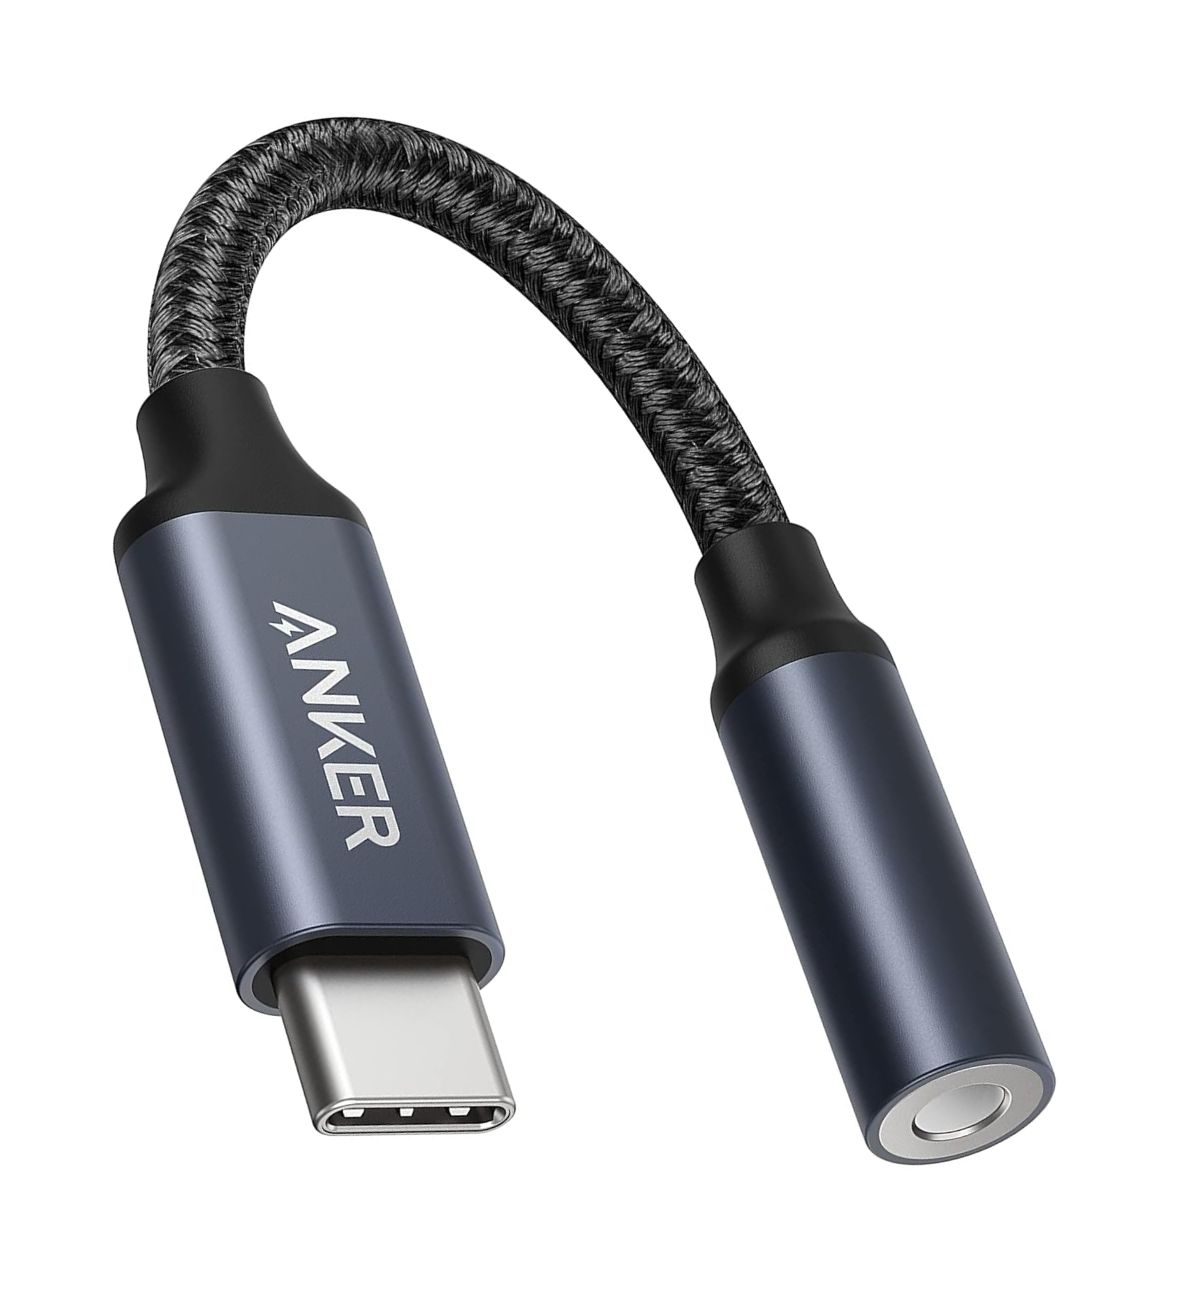 A close-up image of the Anker USB C to Audio Adapter connected to a USB-C port on a smartphone or laptop. Earphones are plugged into the 3.5mm jack of the adapter. The user is holding the phone or laptop and appears to be listening to music or watching a video.